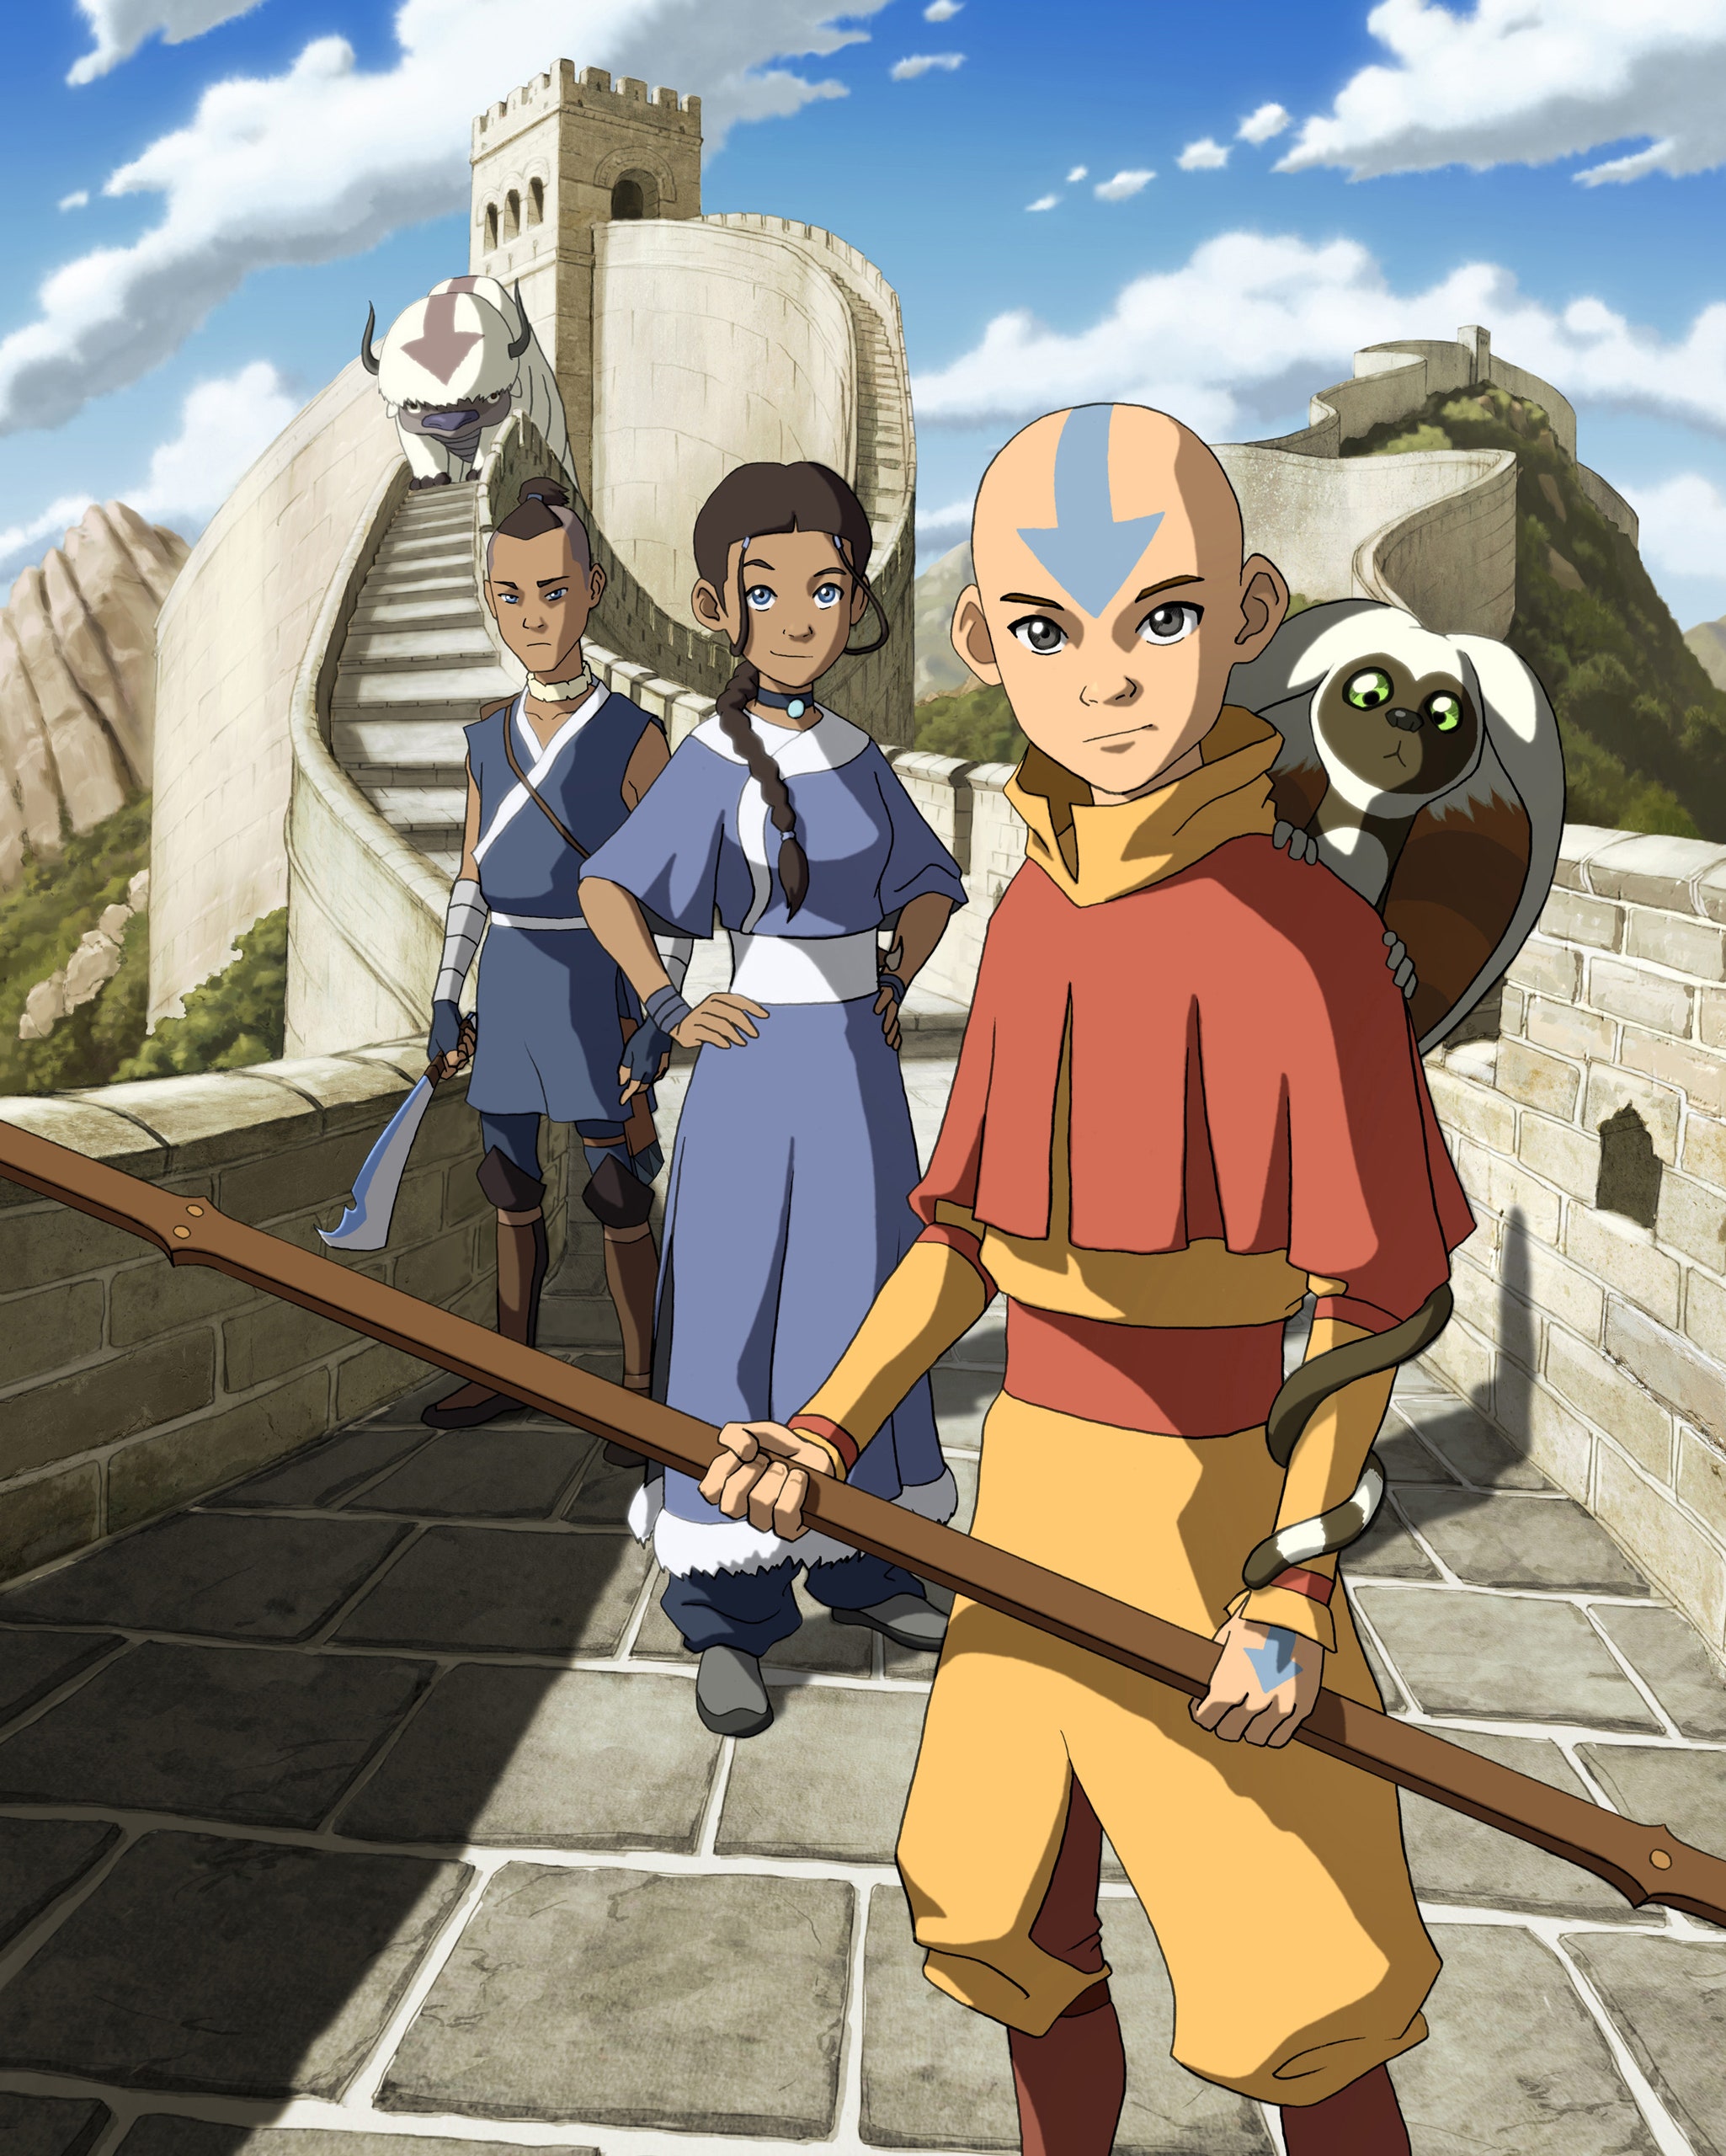 allan legates share pictures from avatar: the last airbender photos